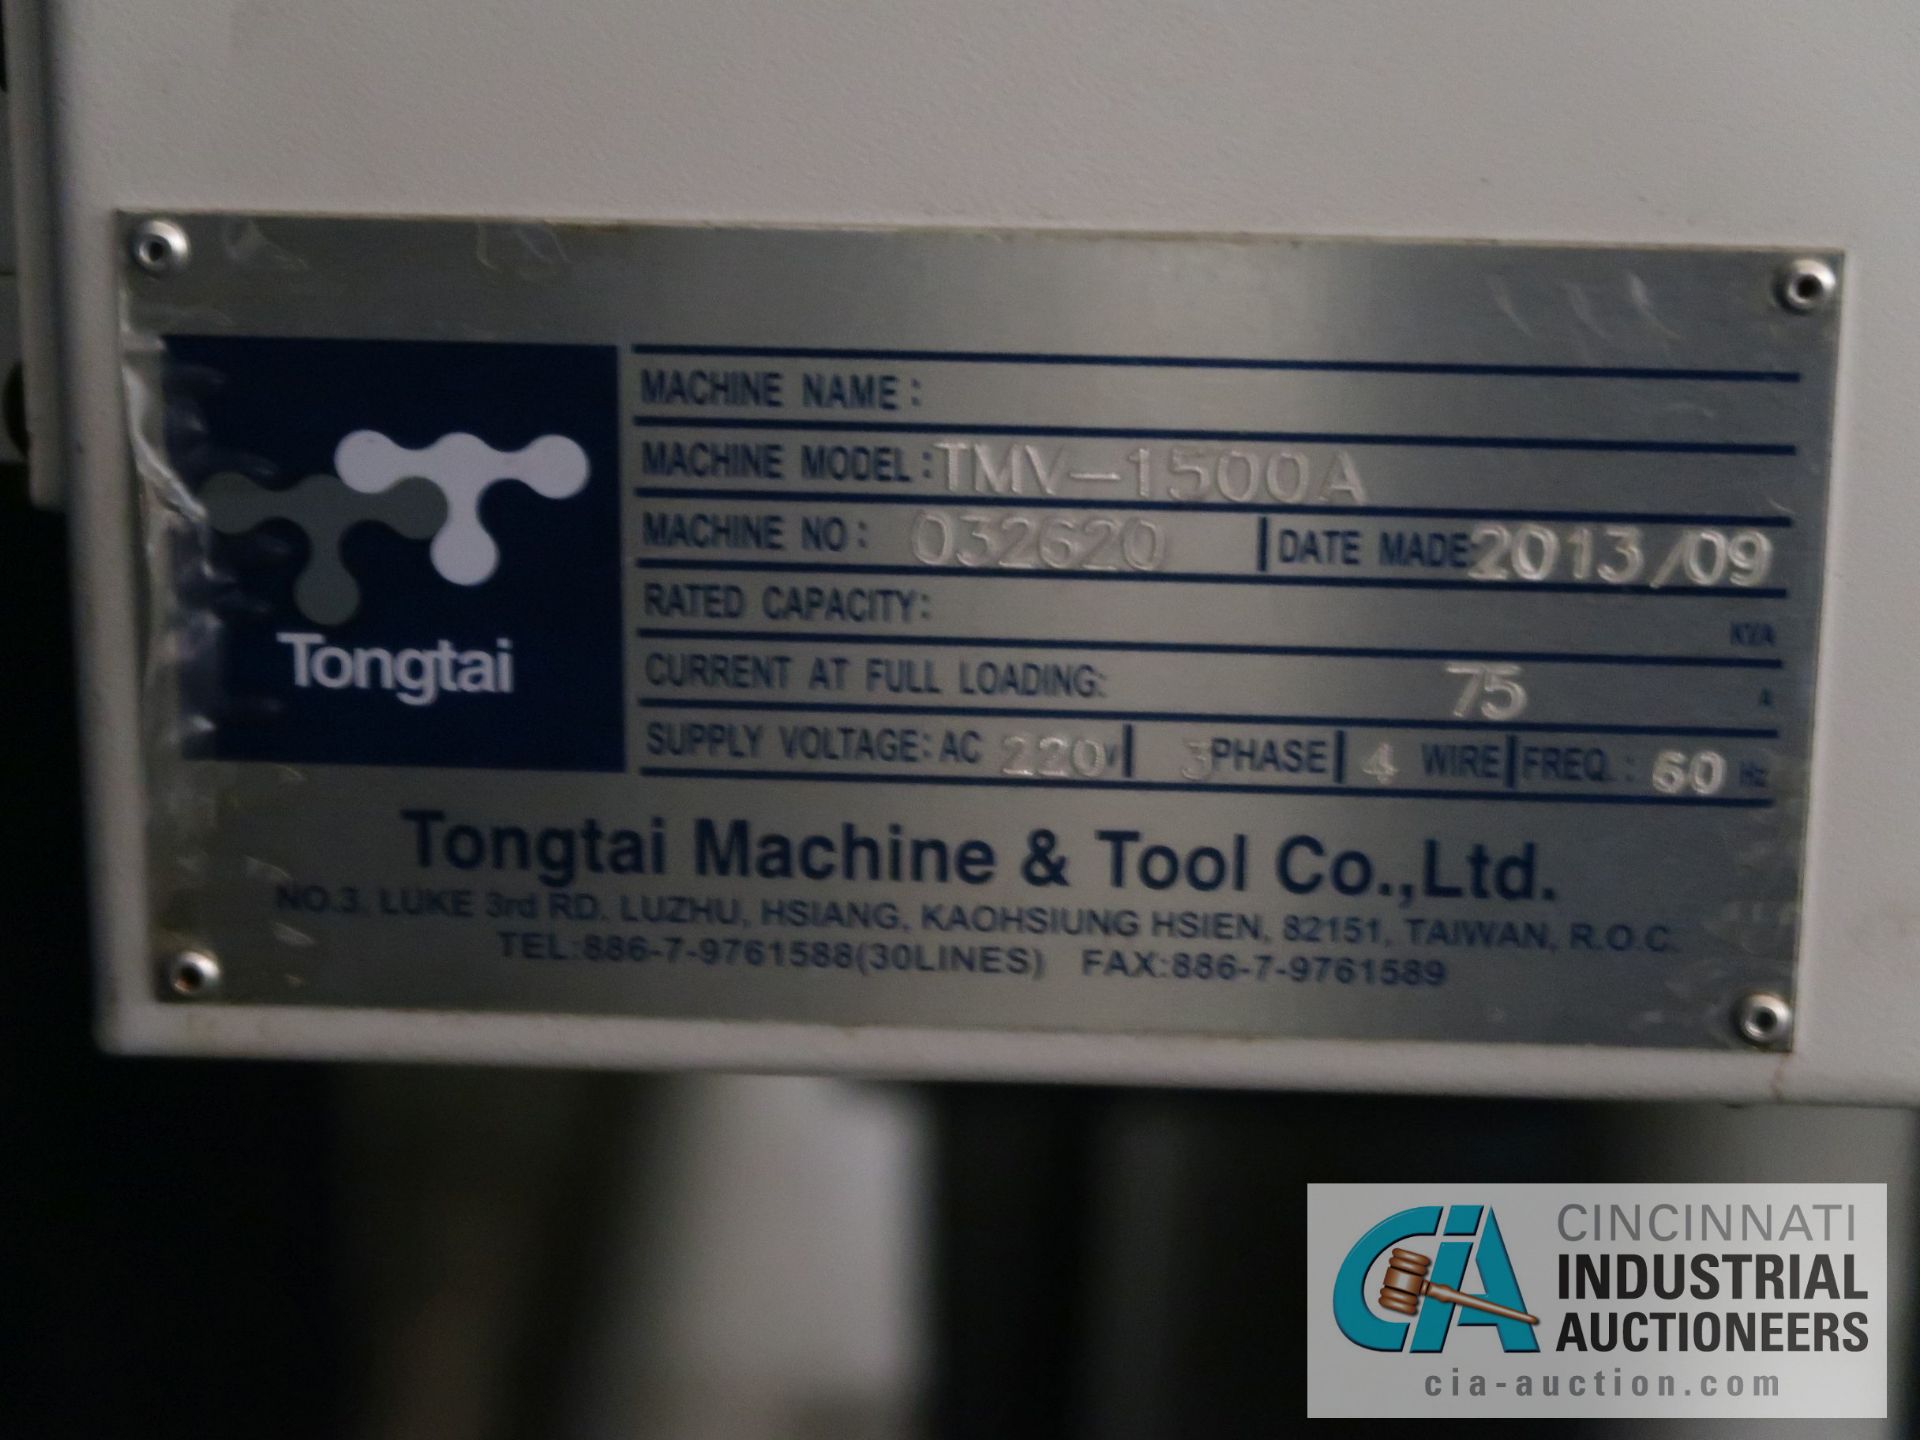 TONGTAI MODEL TMV-1500A HEAVY DUTY CNC VERTICAL MACHINING CENTER; S/N 032620, FANUC OI-MD CONTROL, - Image 16 of 19